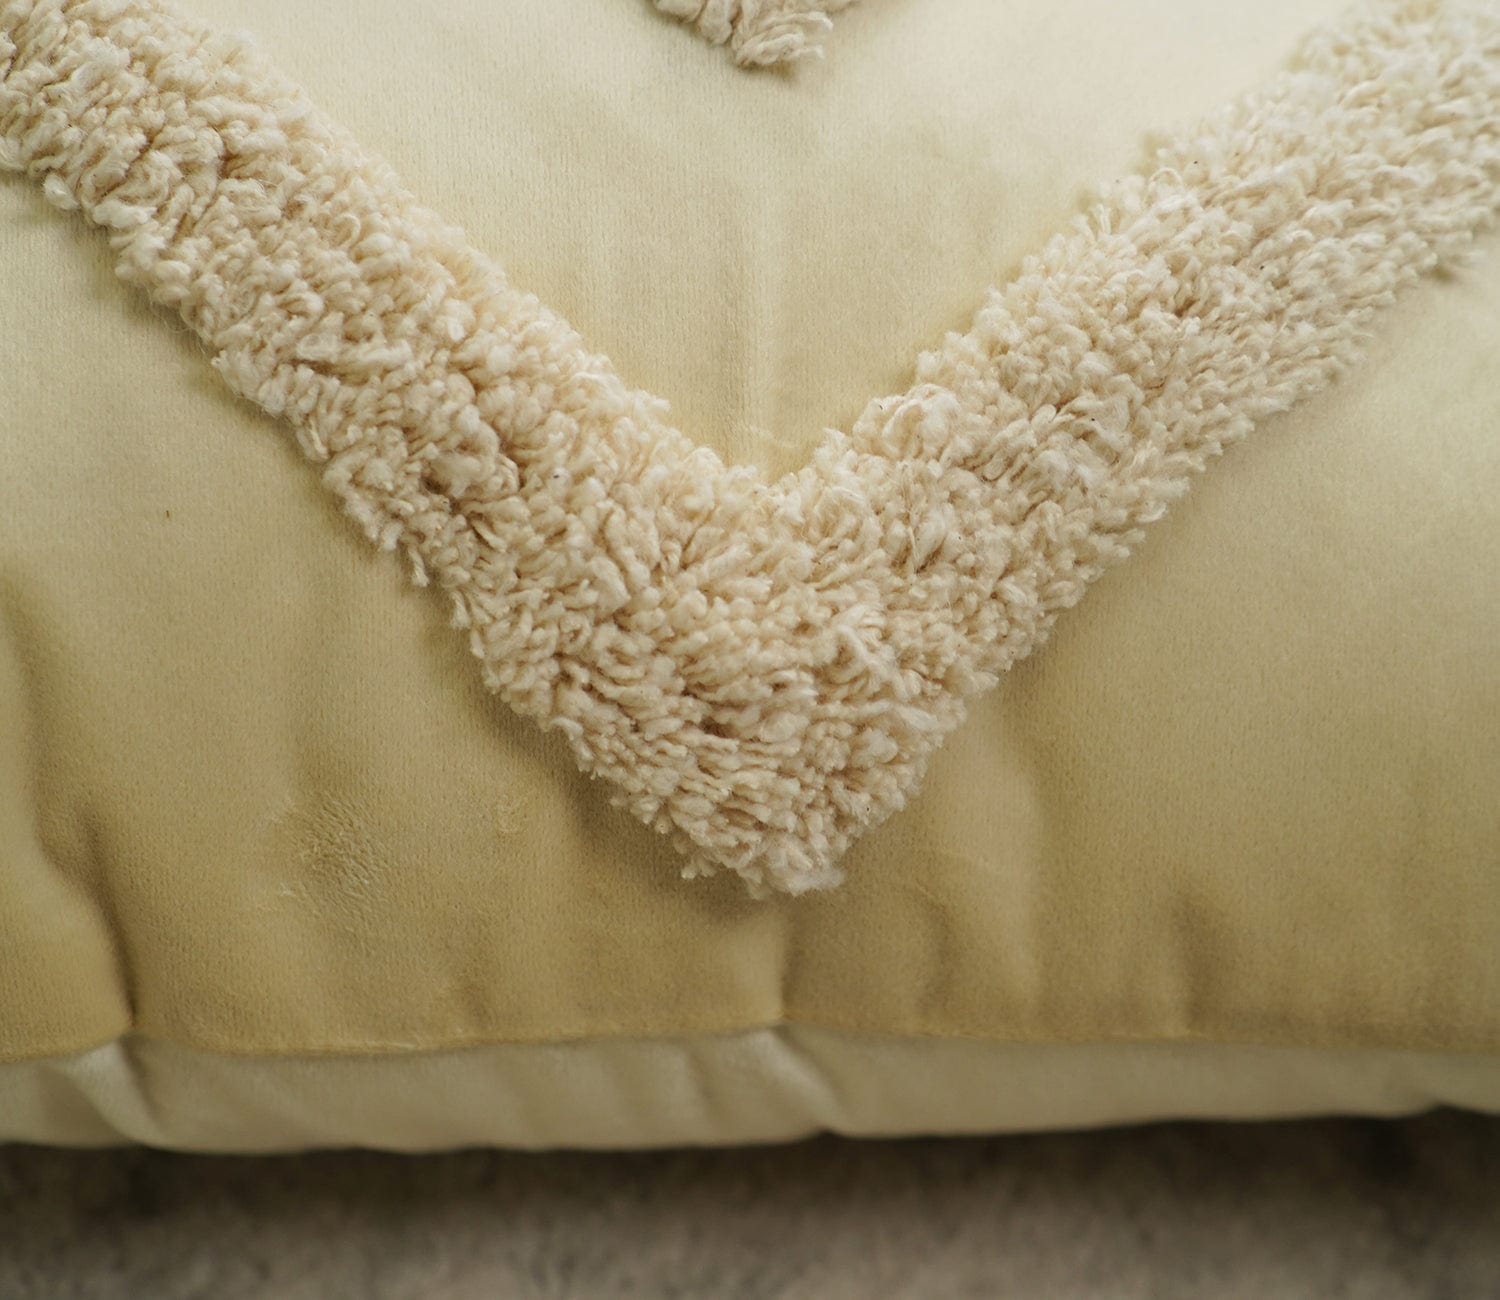 Super Soft Velvet Cushion Covers - Set of 2 (18 x 18 inches,ivory)